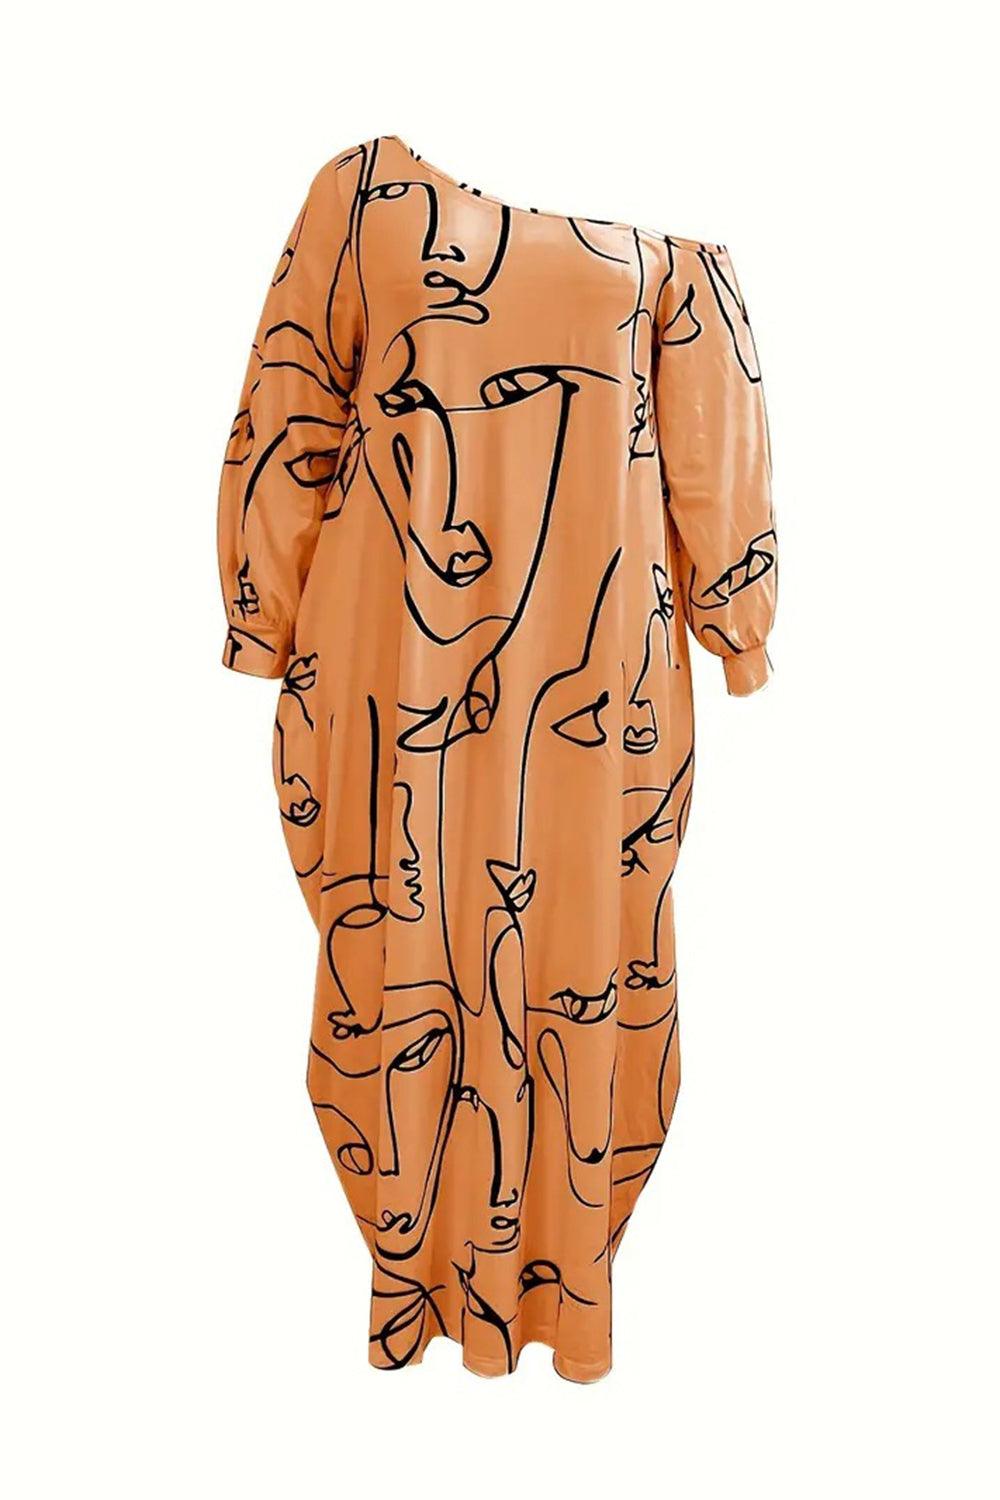 a dress with a drawing of a woman's face on it